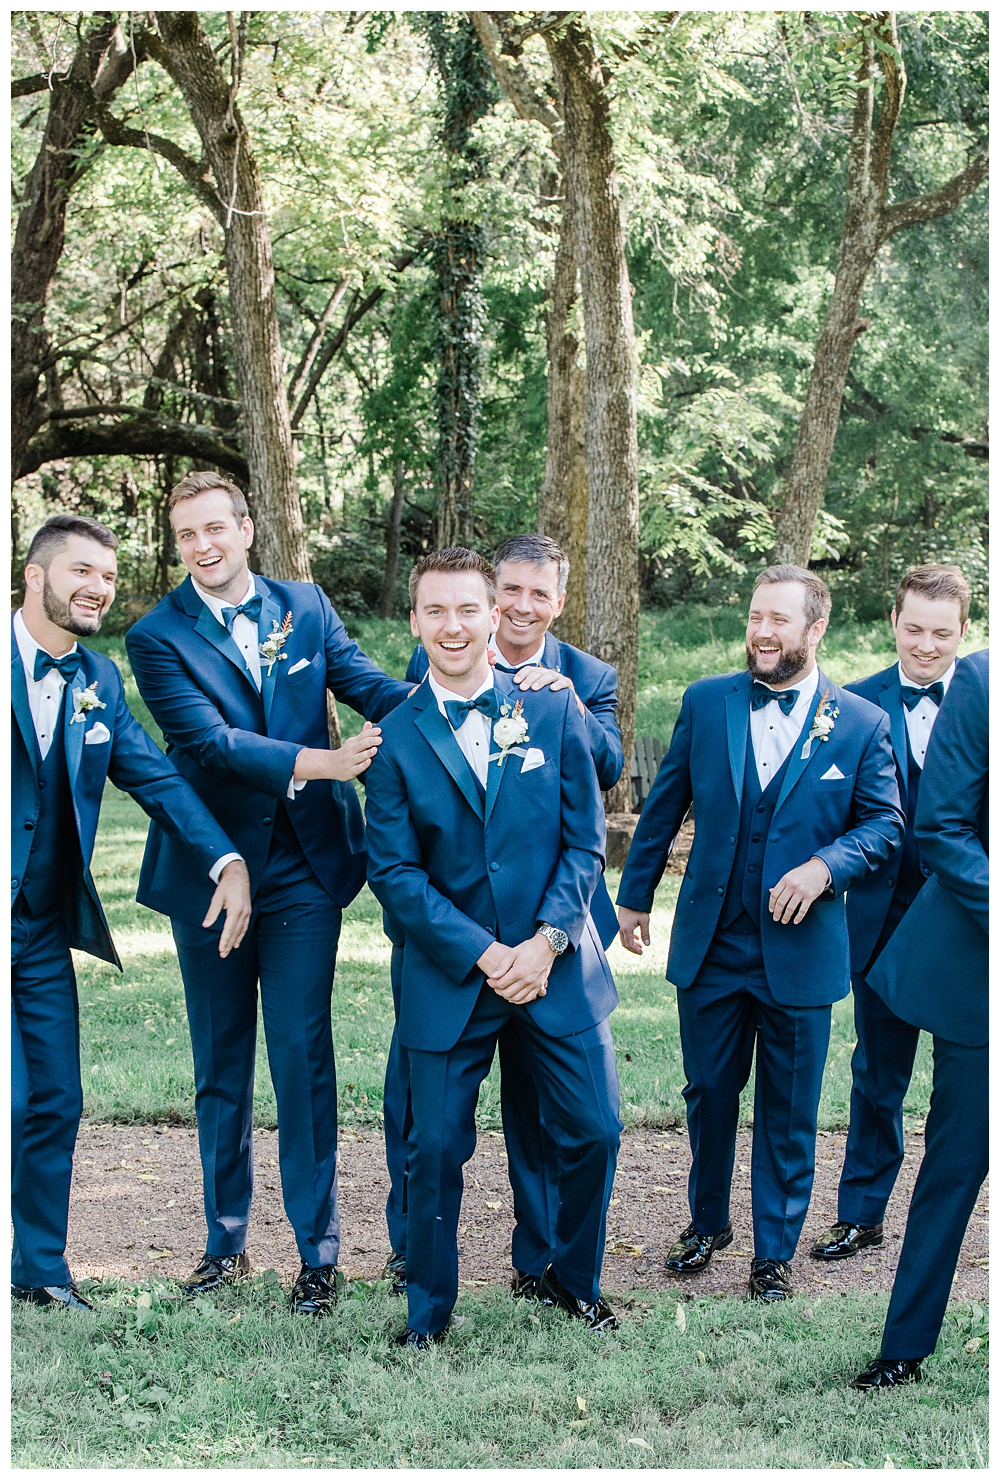 The Inn at Willow Grove, Willow Grove Wedding, Southern Weddings, Inn at Willow Grove, Virginia Wedding Venue, Virginia Bride, Virginia Weddings, bridal party, groomsmen, navy suits,